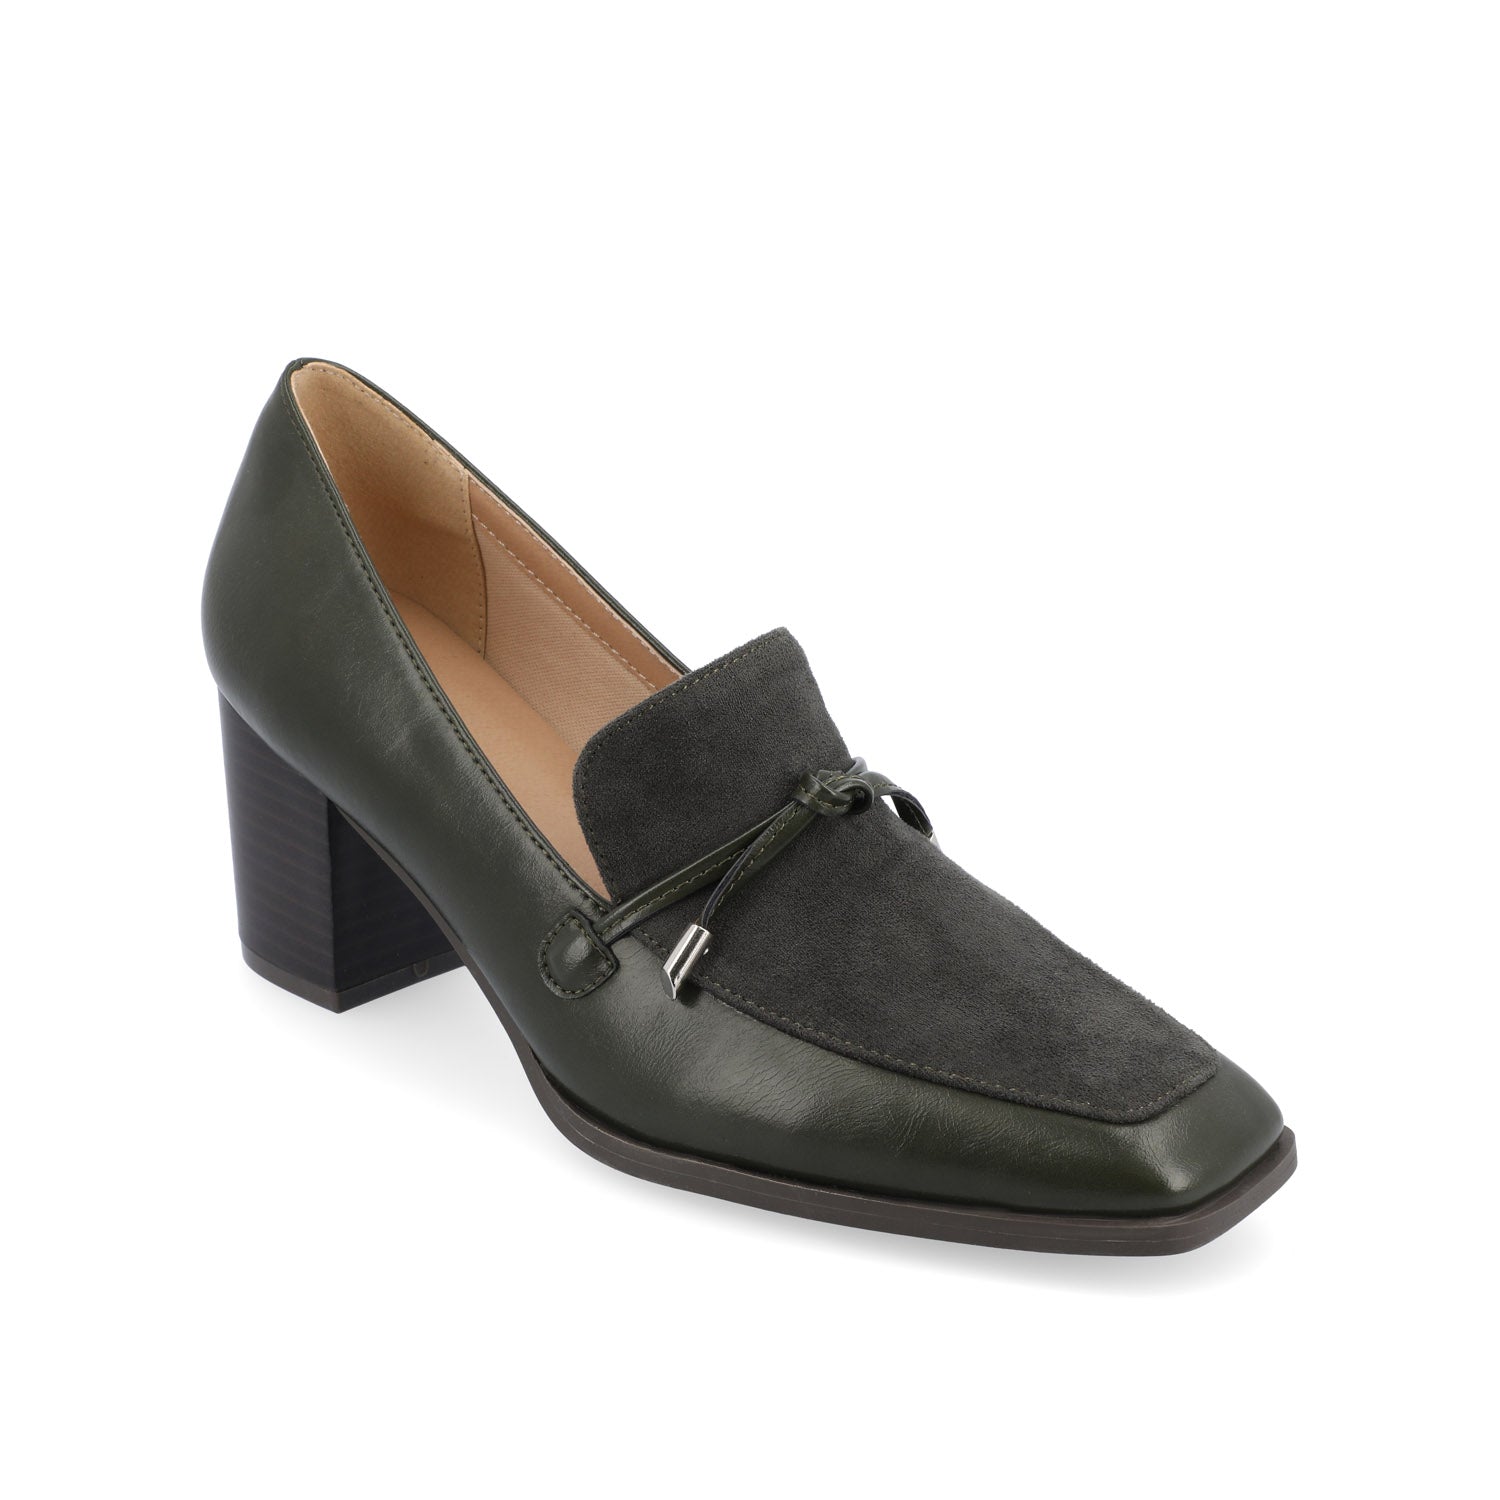 CRAWFORD HEELED LOAFERS IN FAUX LEATHER